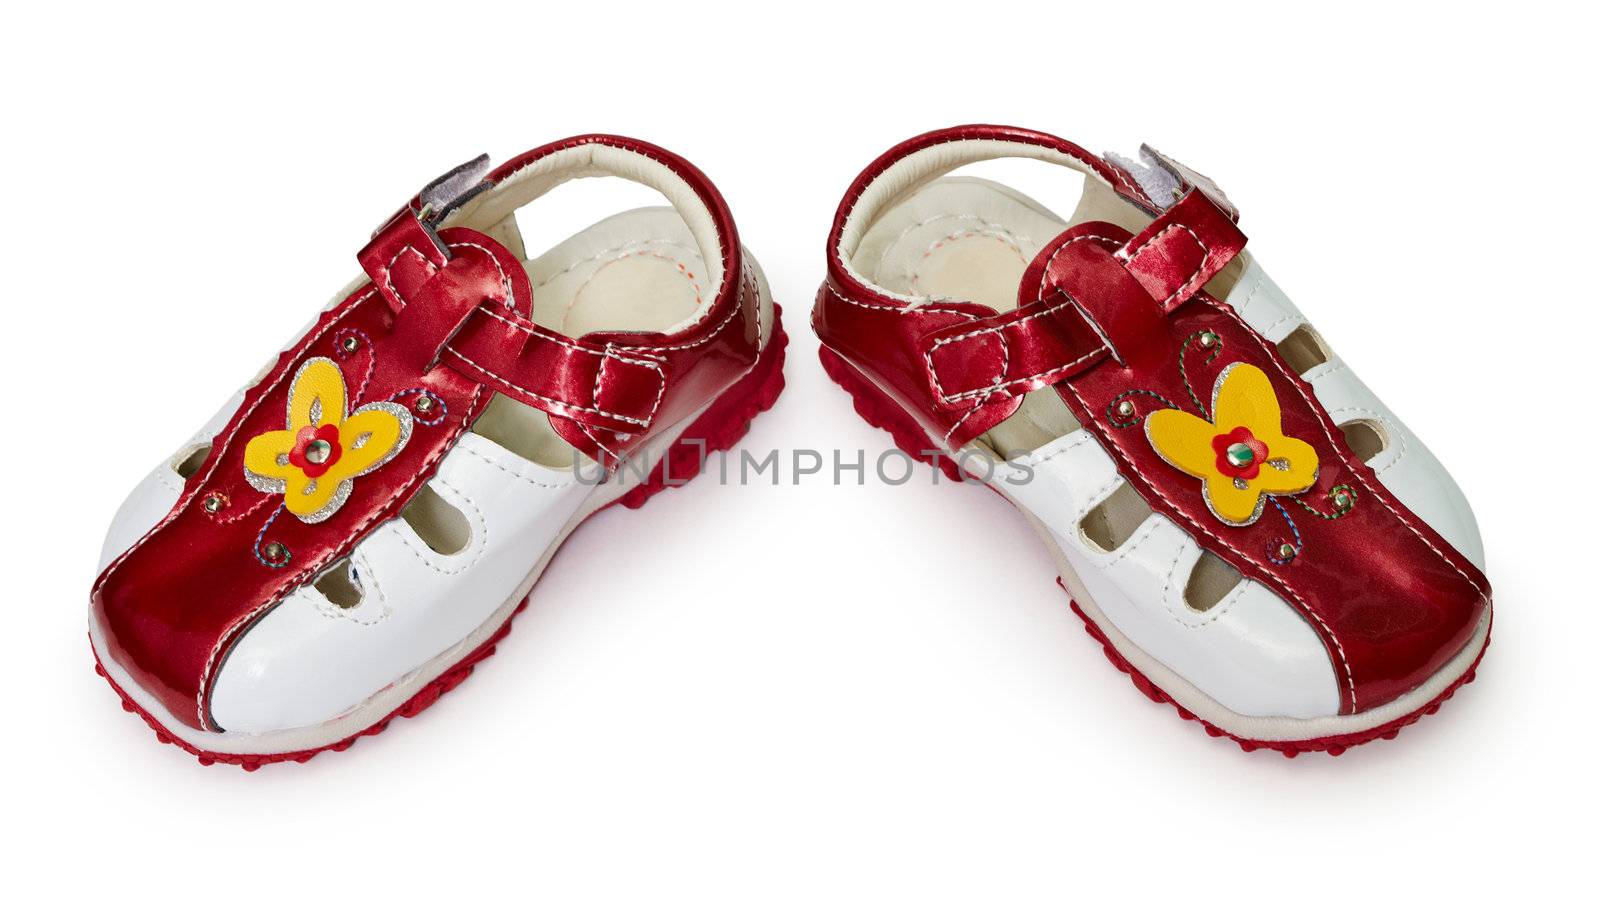 Children's cheap shoes on white by pzaxe